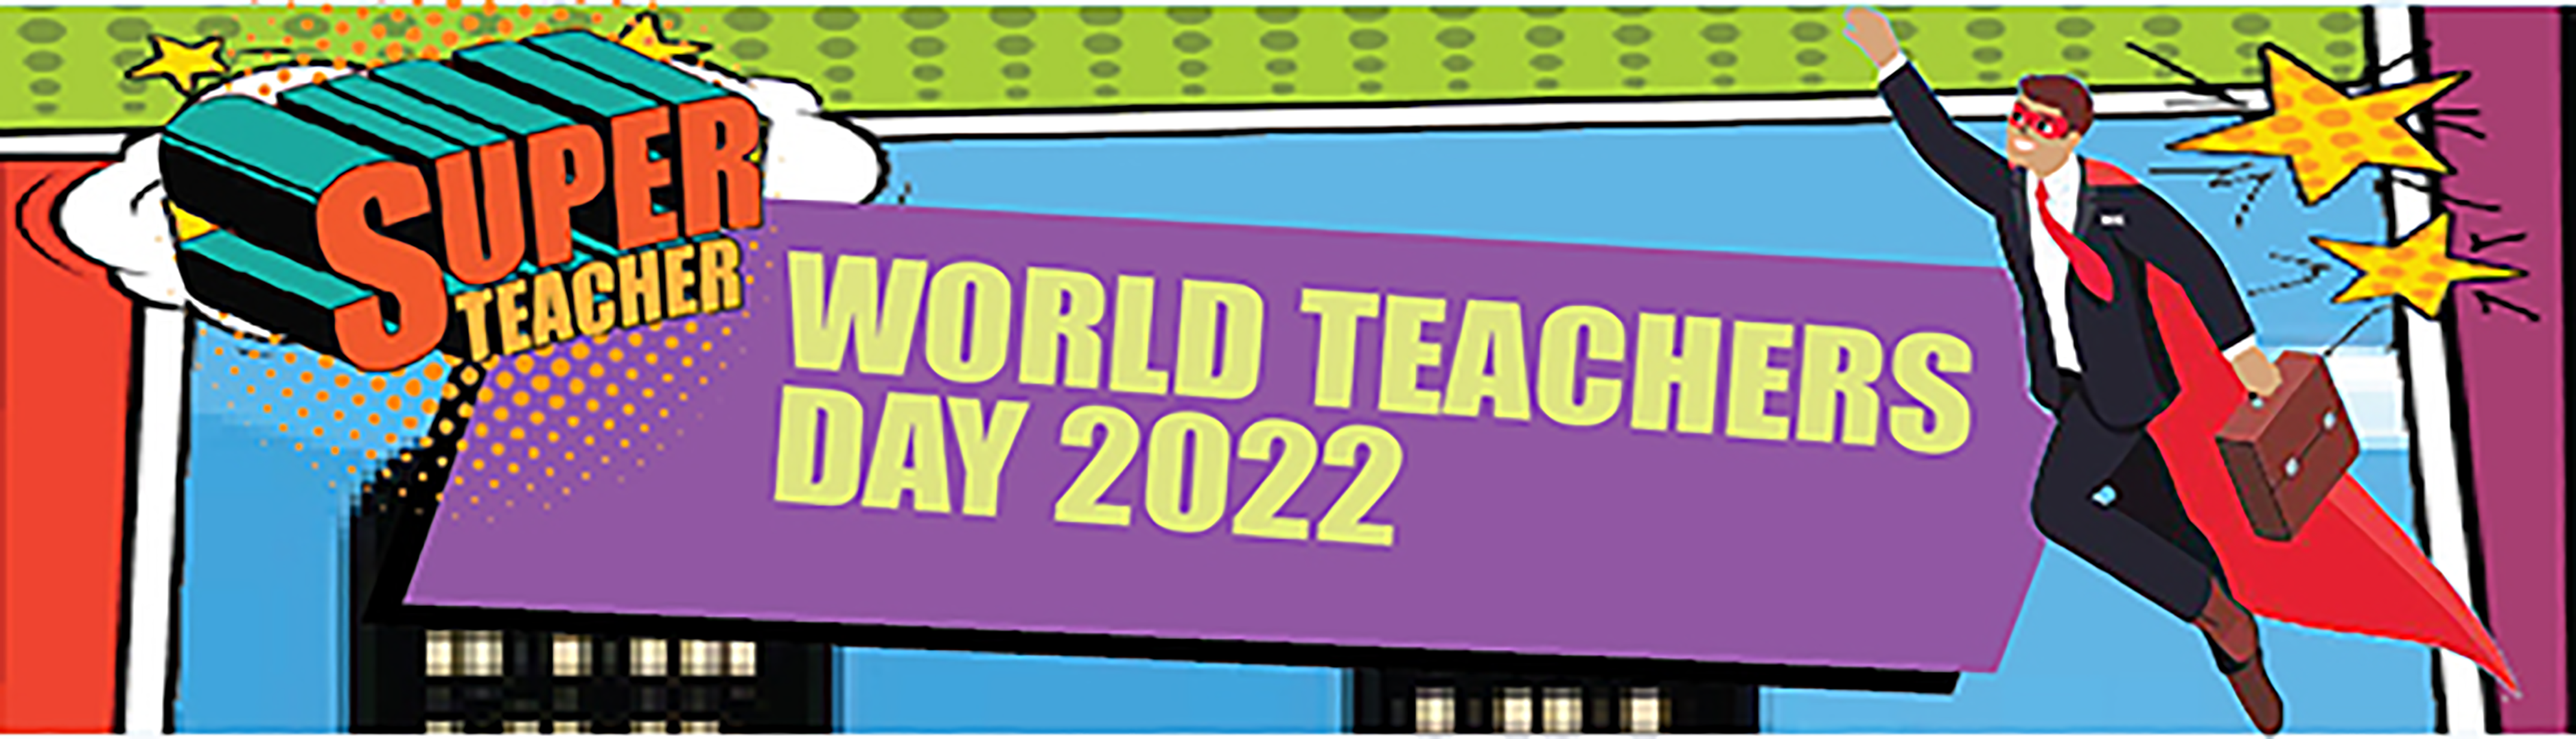 World Teachers Day 2022 Competition